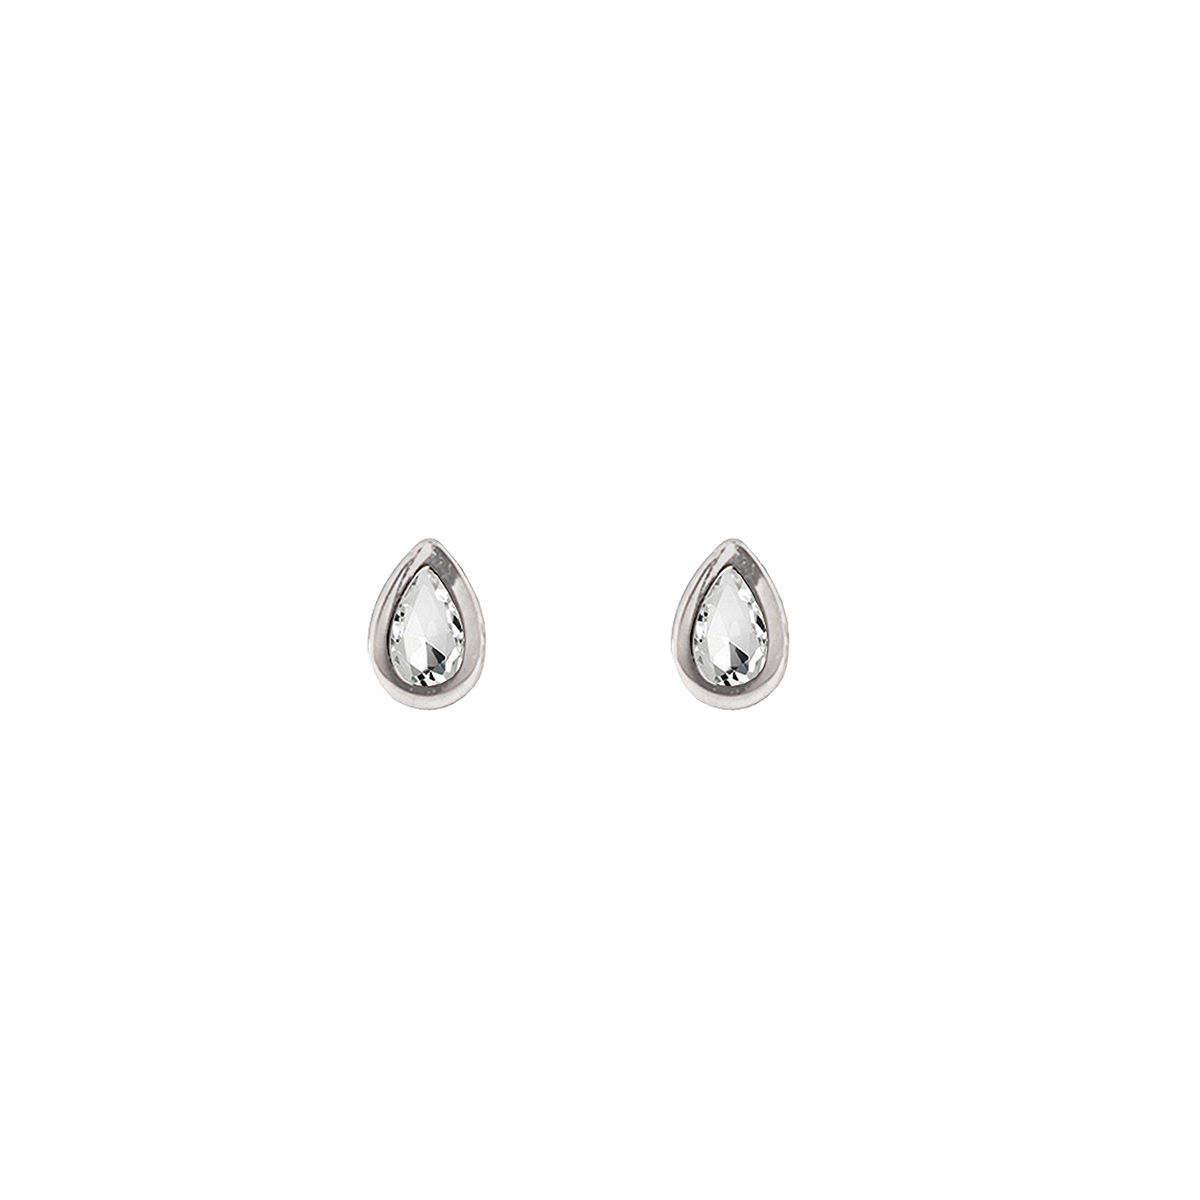 Share more than 84 silver water drop earrings best